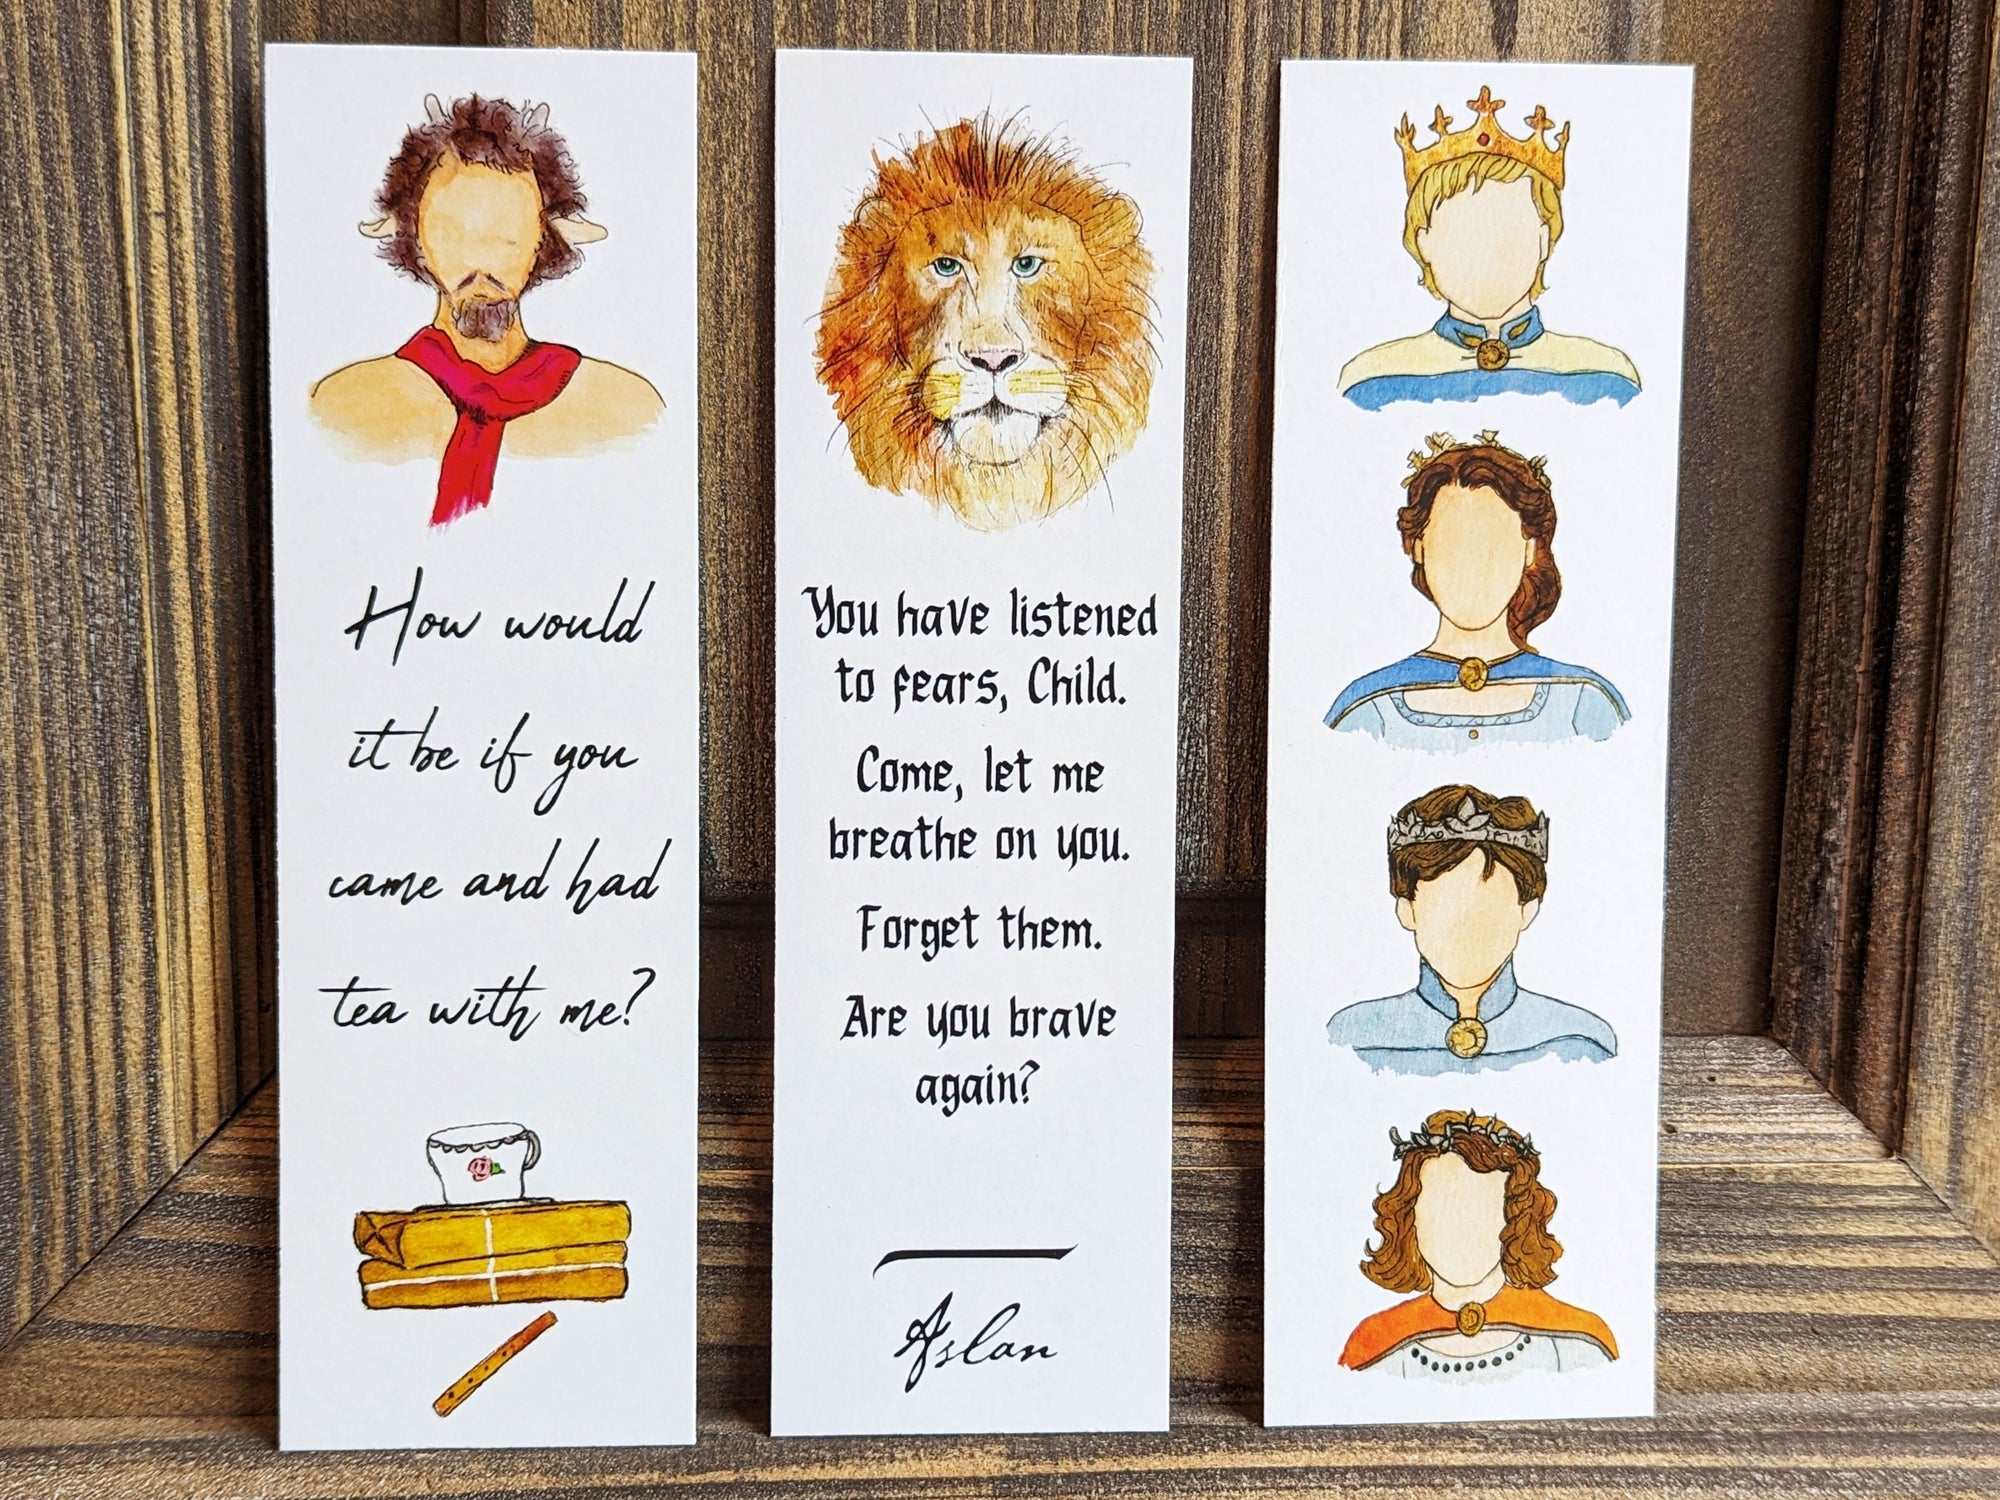 Narnia Set of 3 Bookmarks (The Lion, The Witch & The Wardrobe)